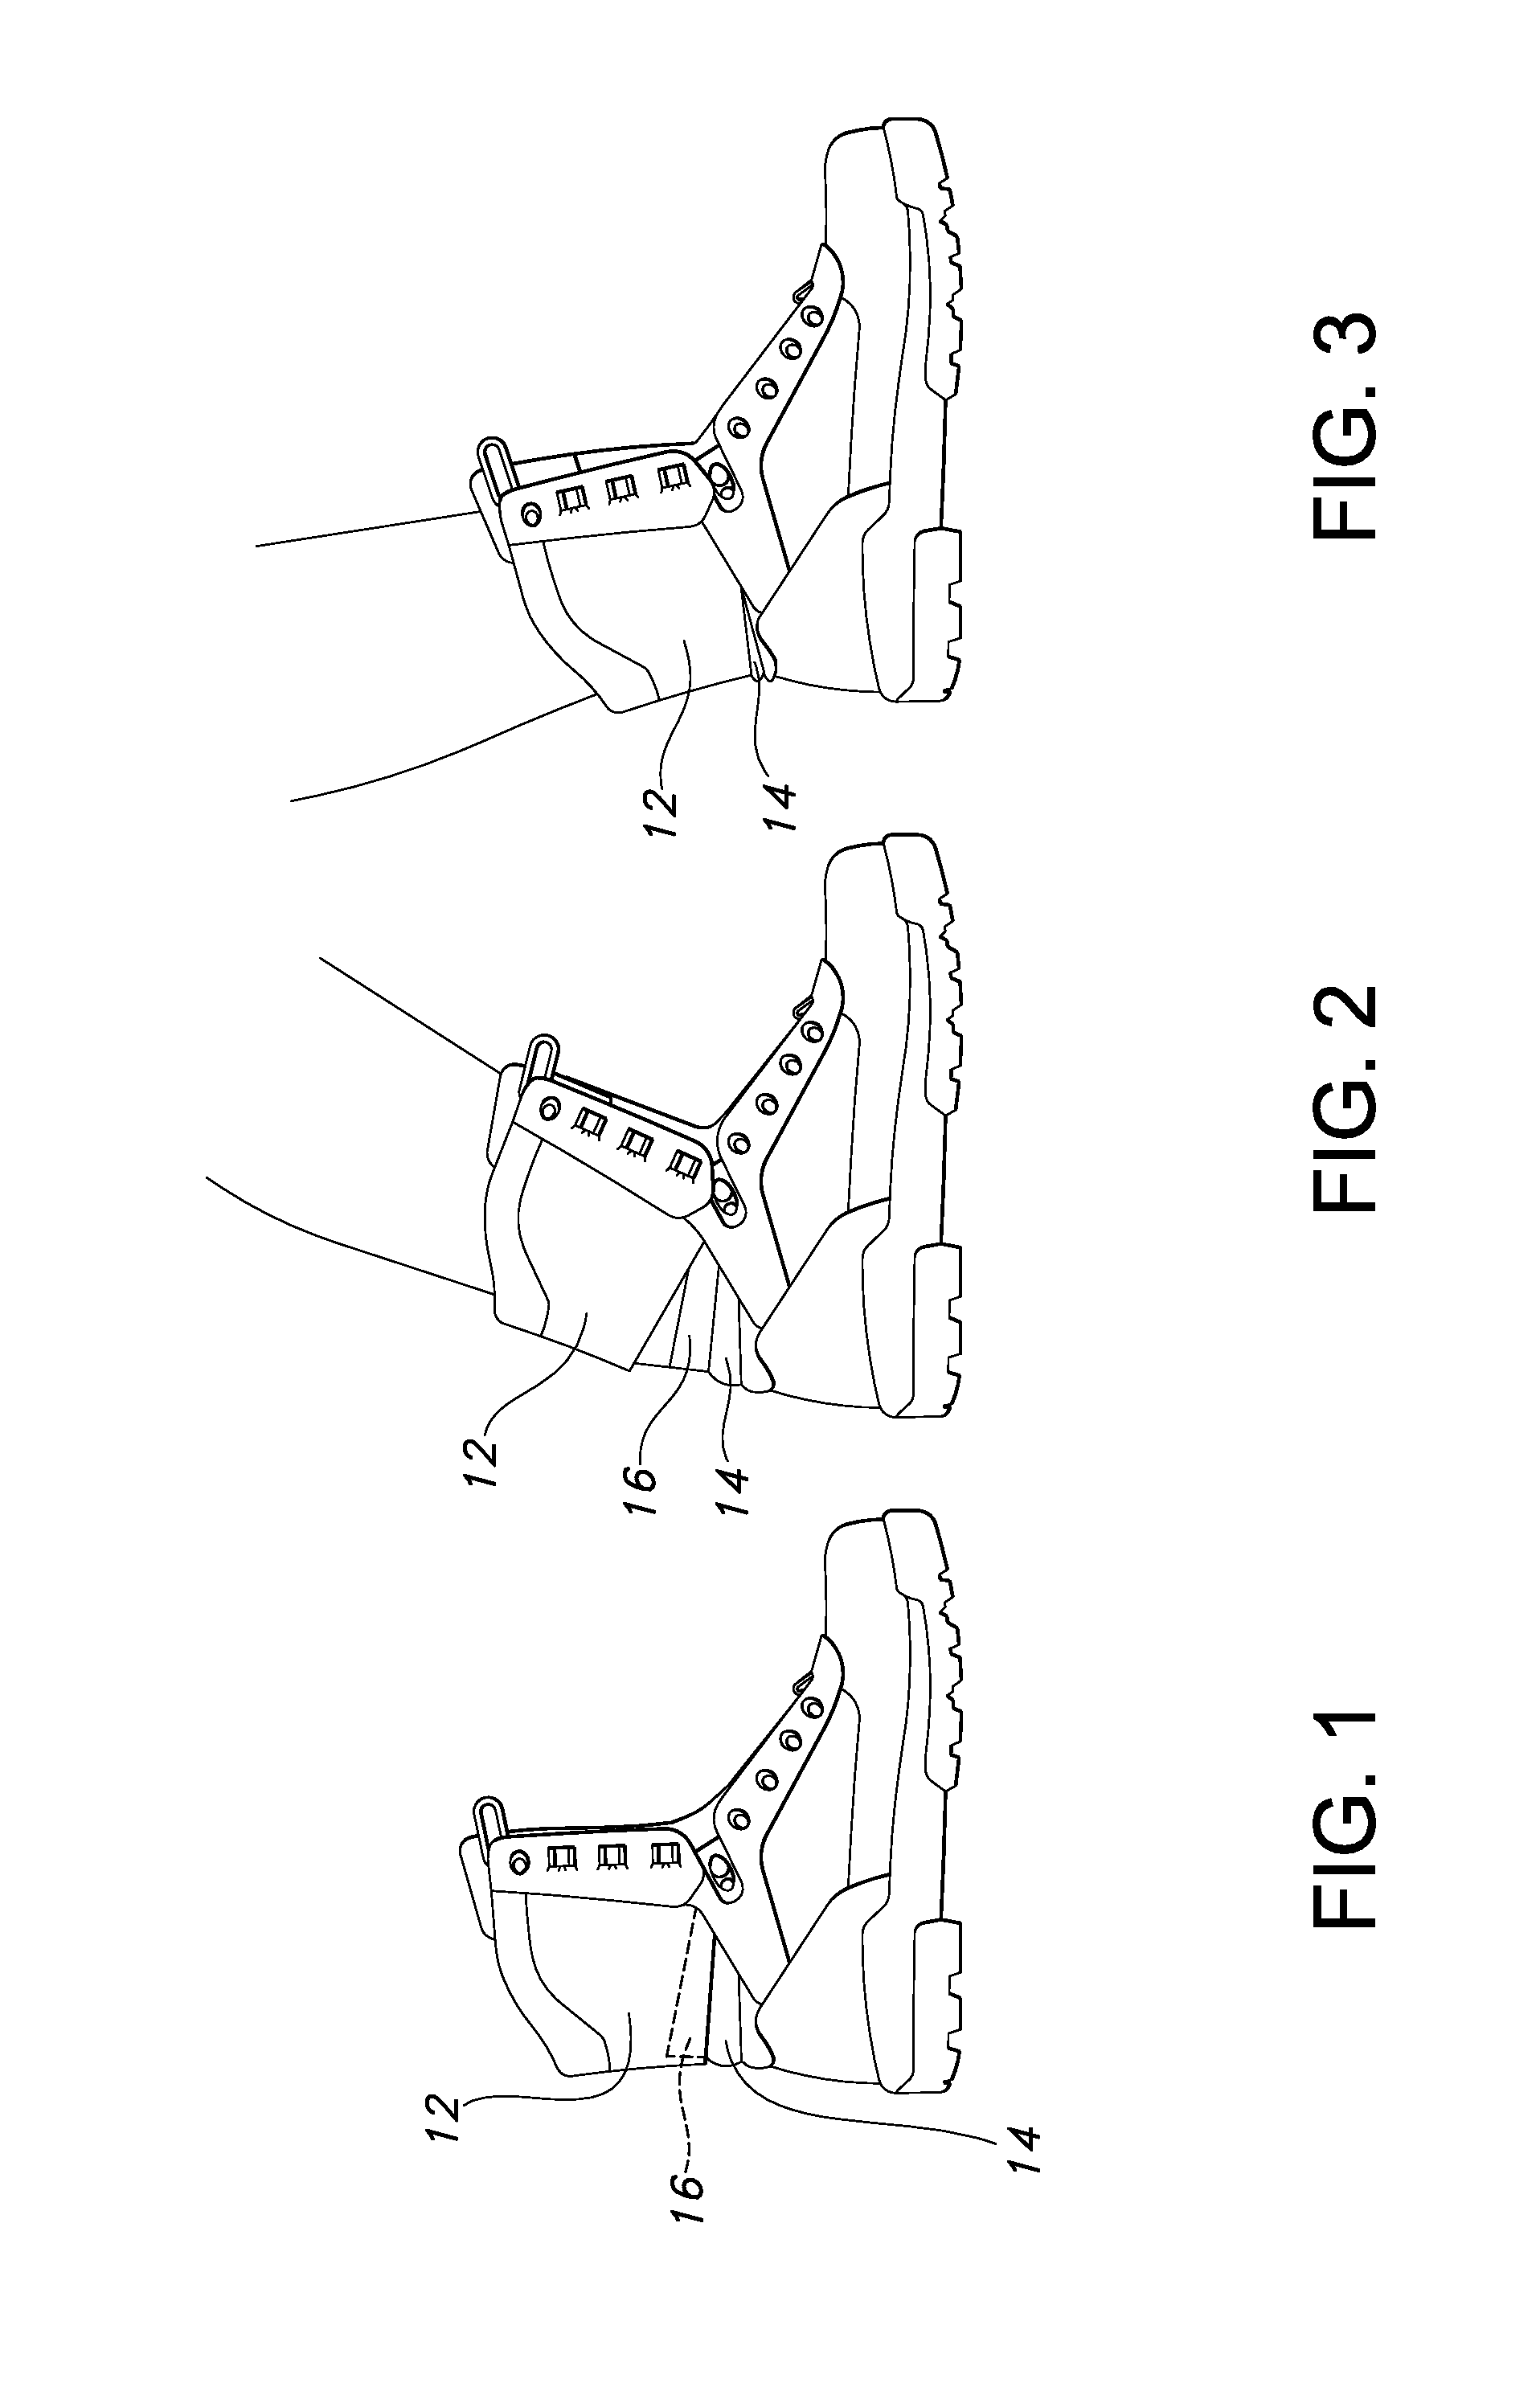 Footwear upper with flexible collar assembly